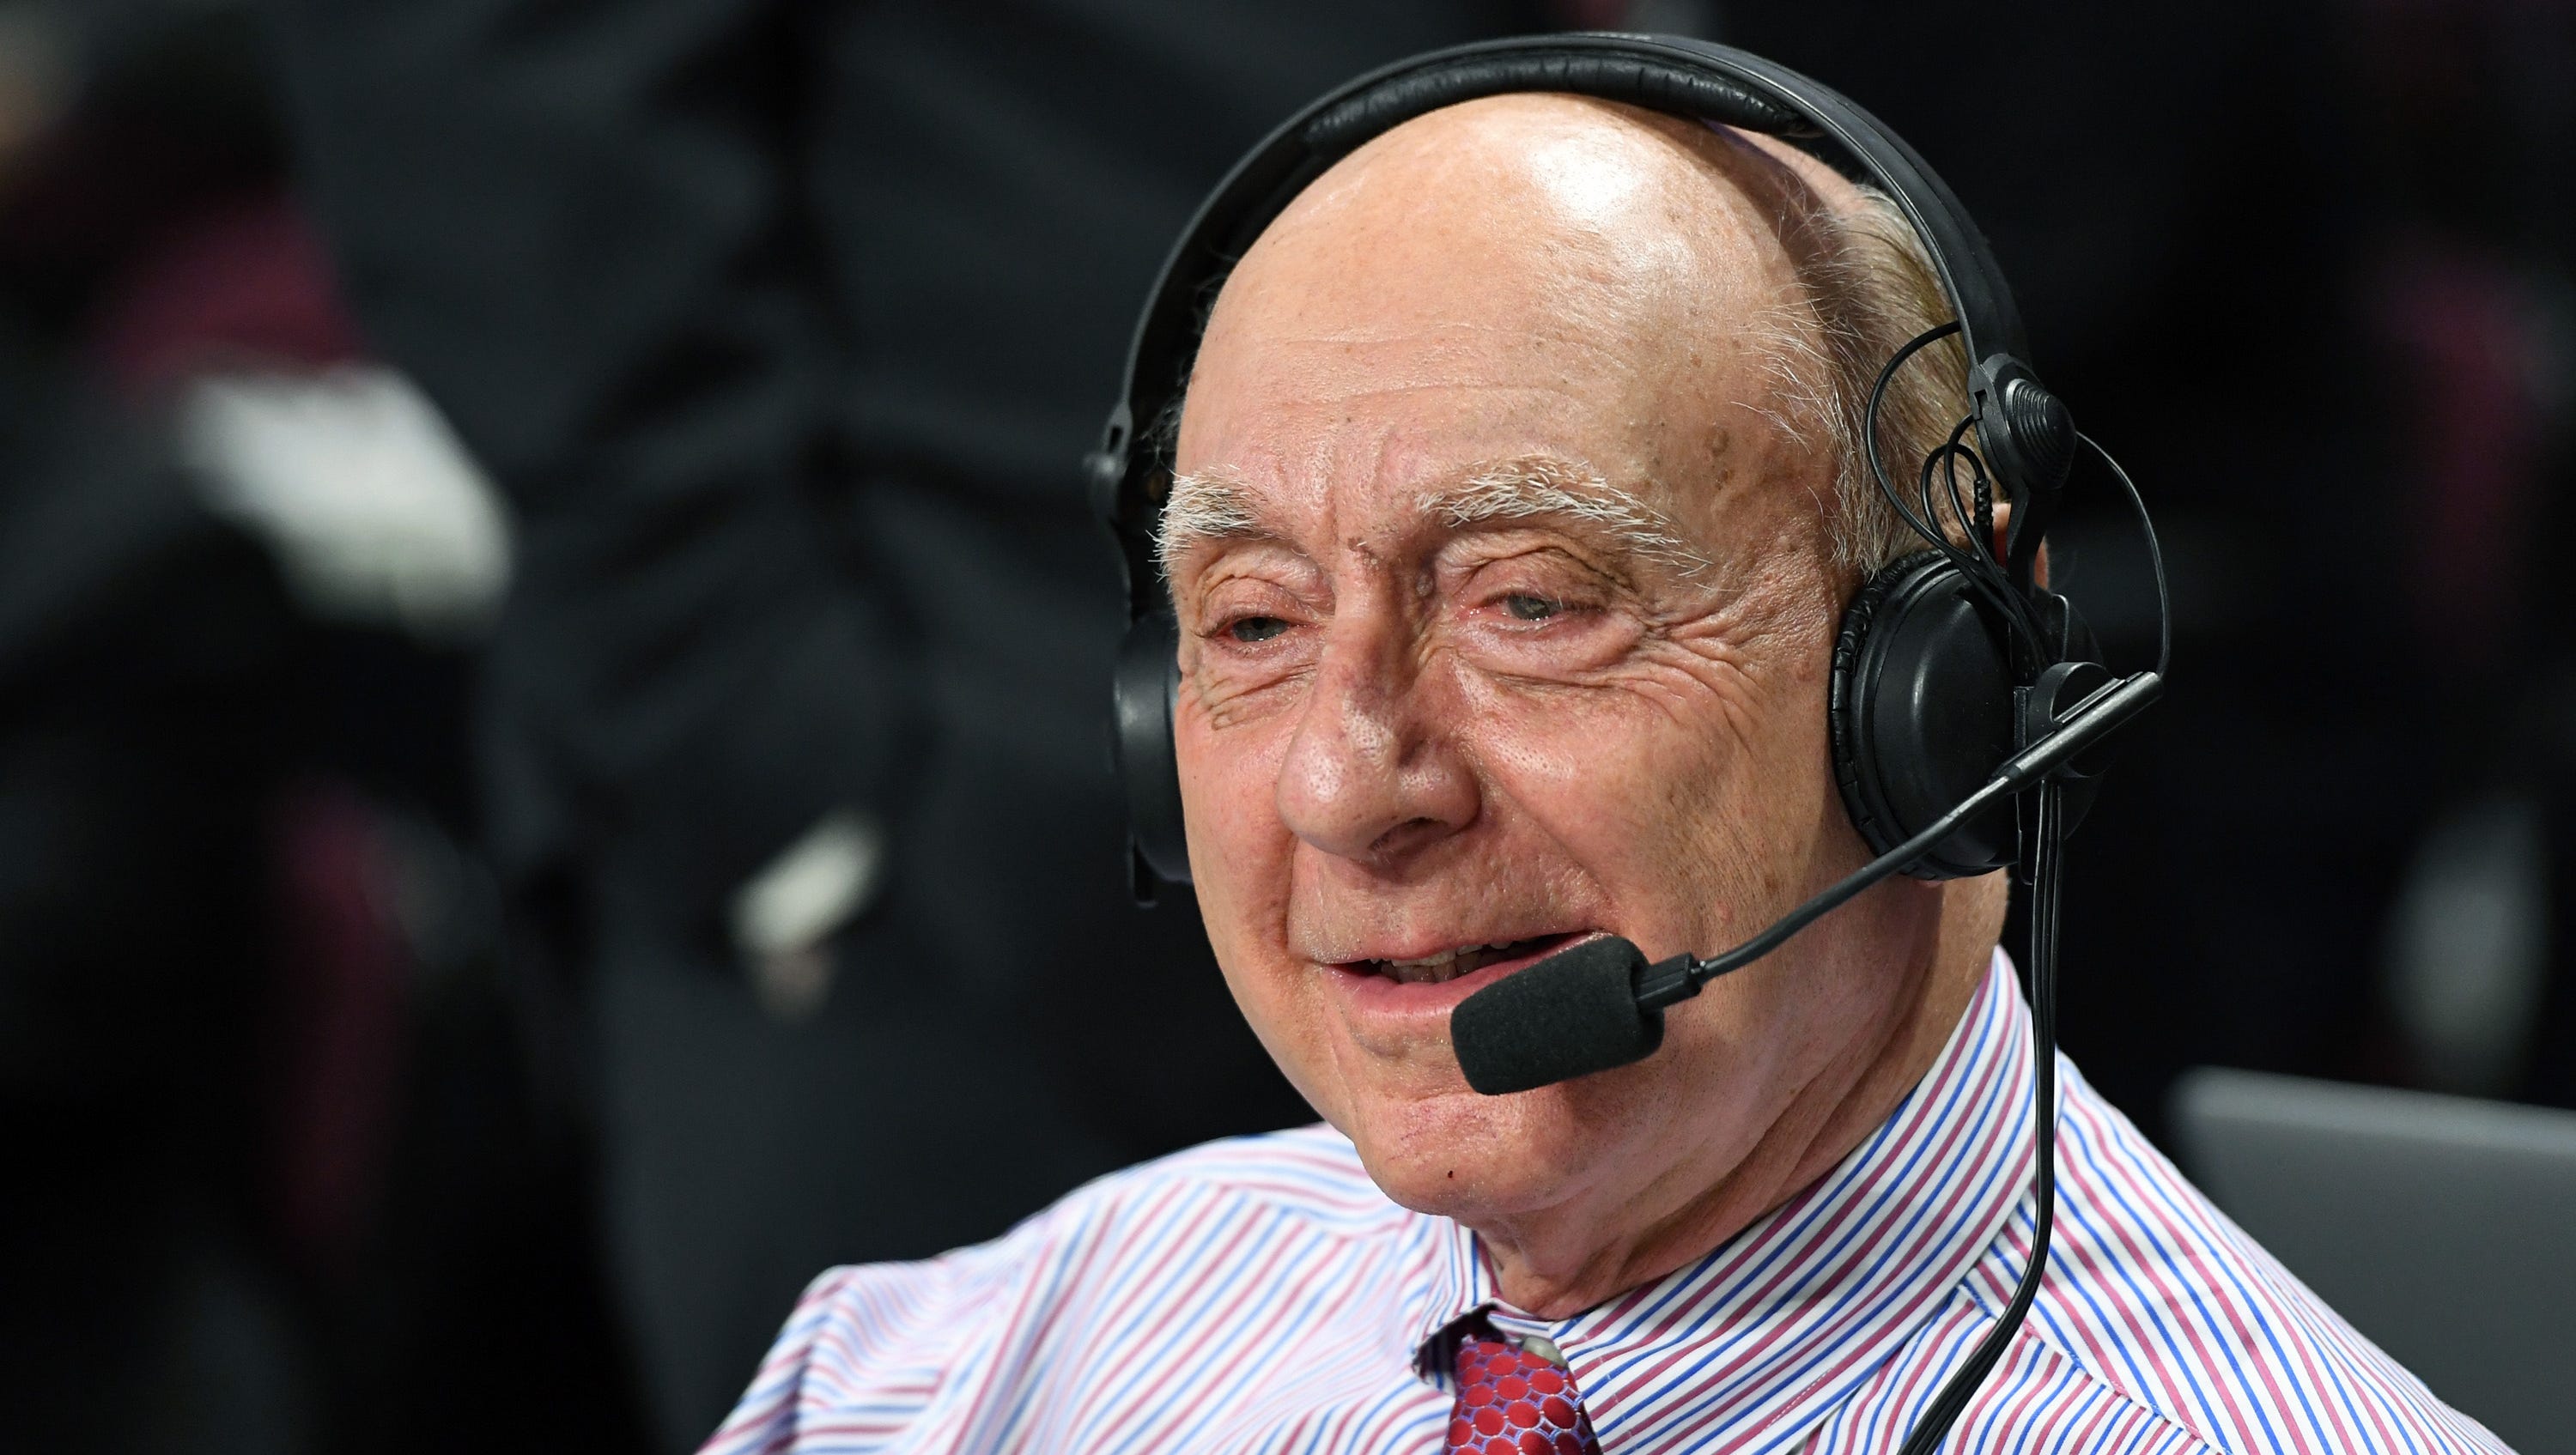 Basketball broadcaster Dick Vitale, 82, says he's cancer-free